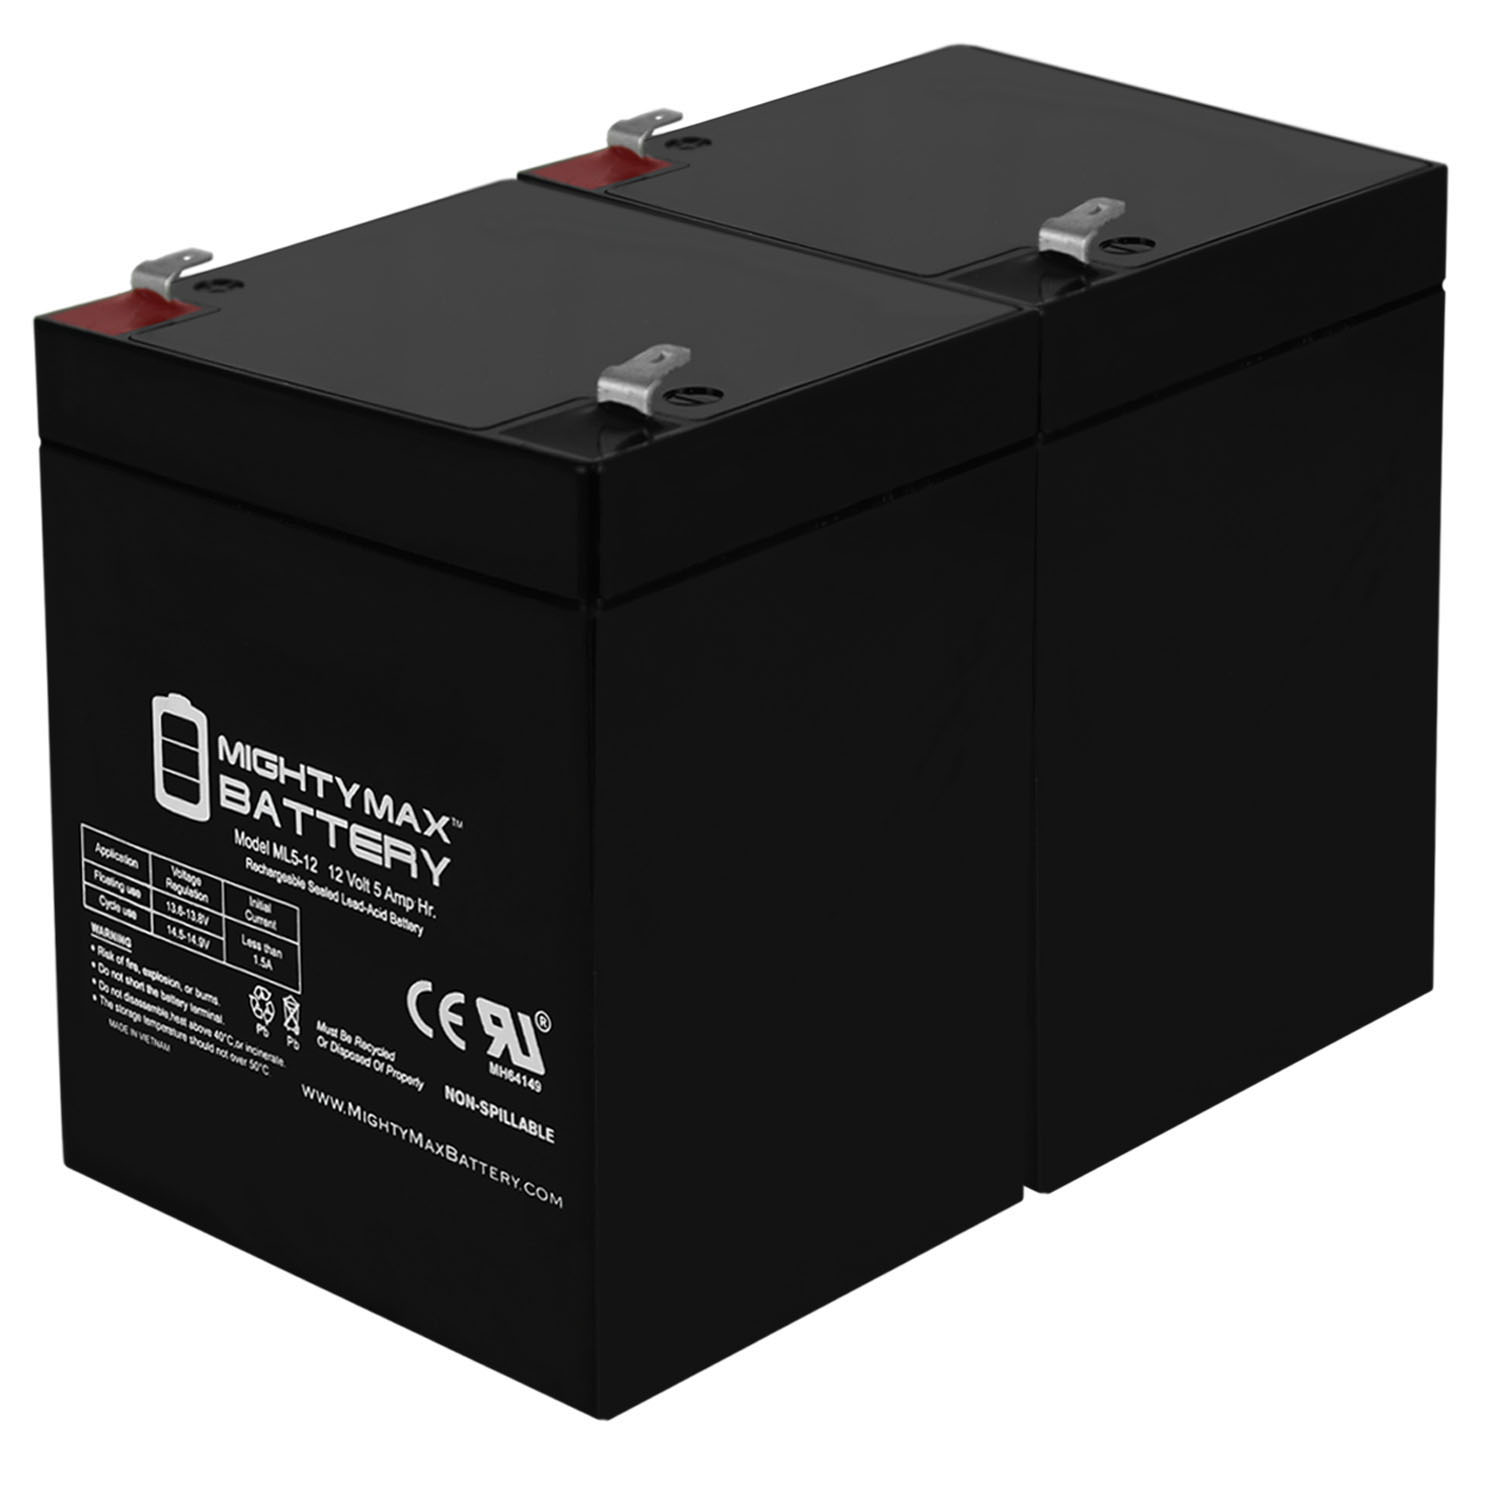 12V 5AH SLA Replacement Battery for Toshiba 1200 - 2 Pack